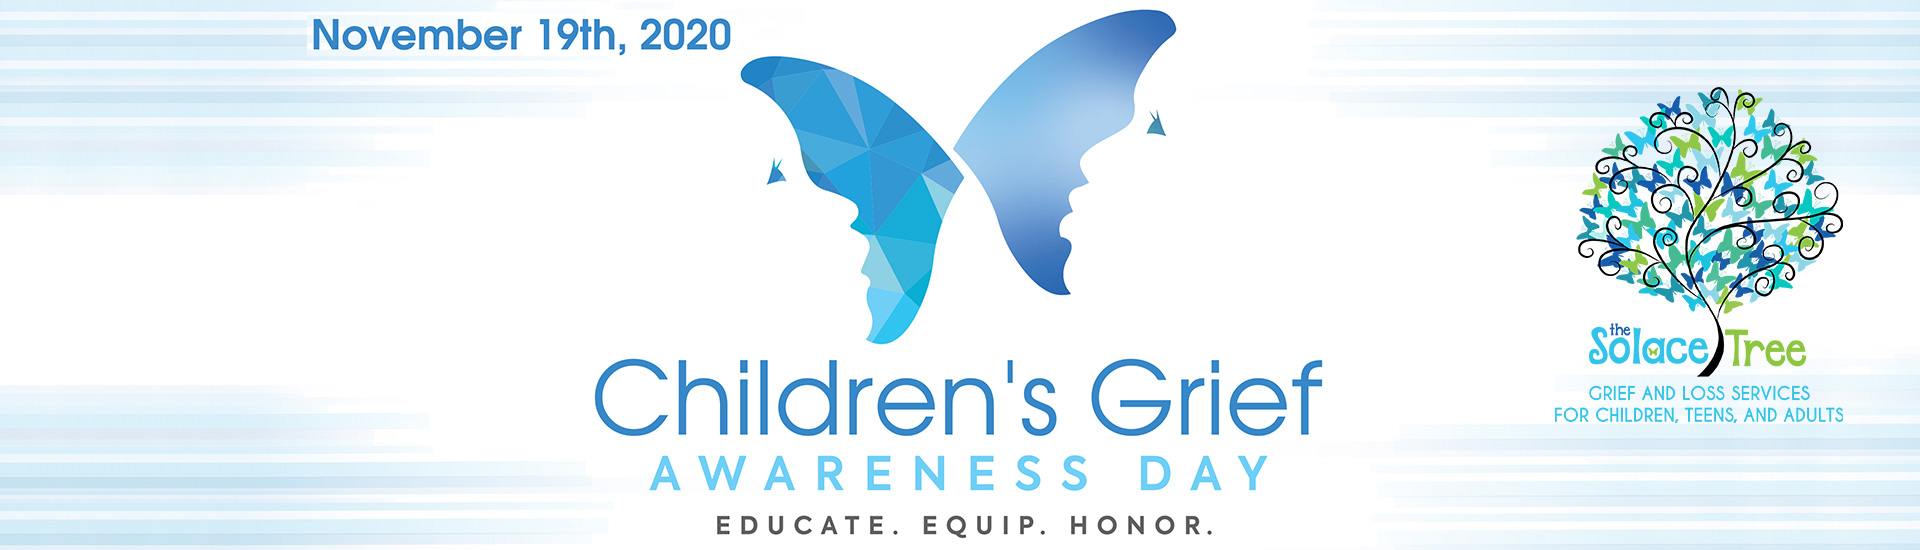 childrens-grief-awareness-day-2020